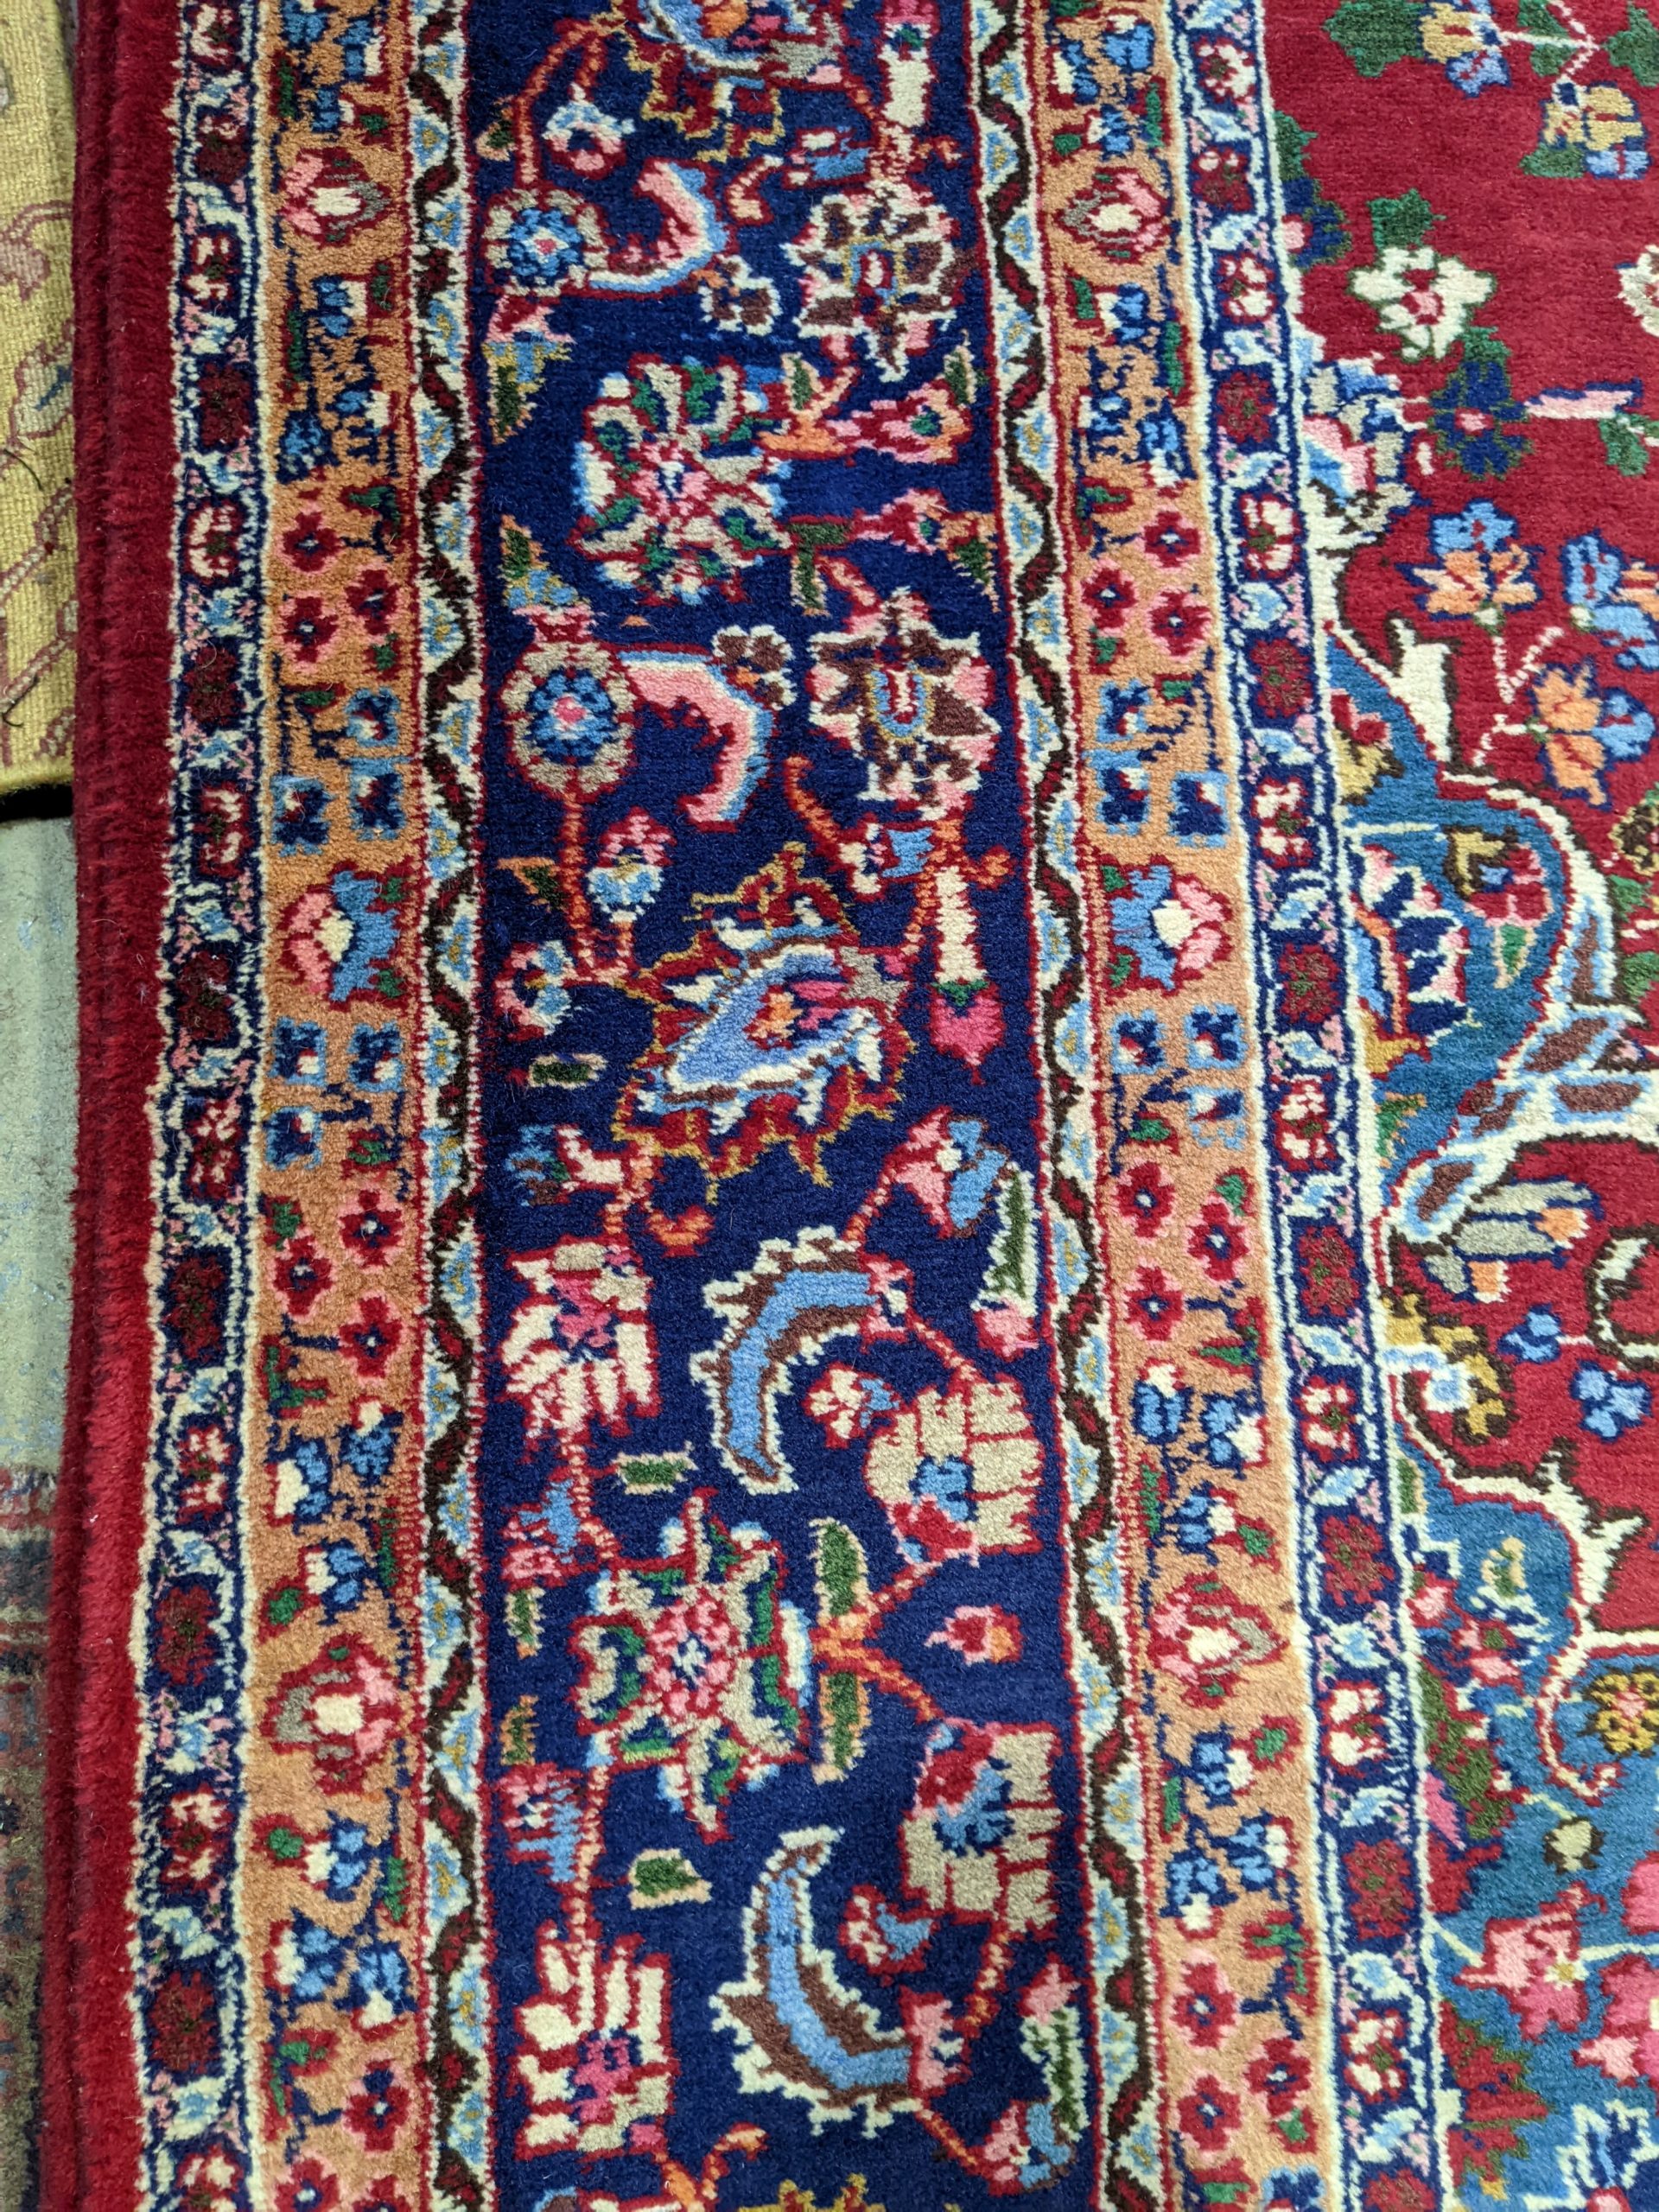 Room-Sized Persian Rug